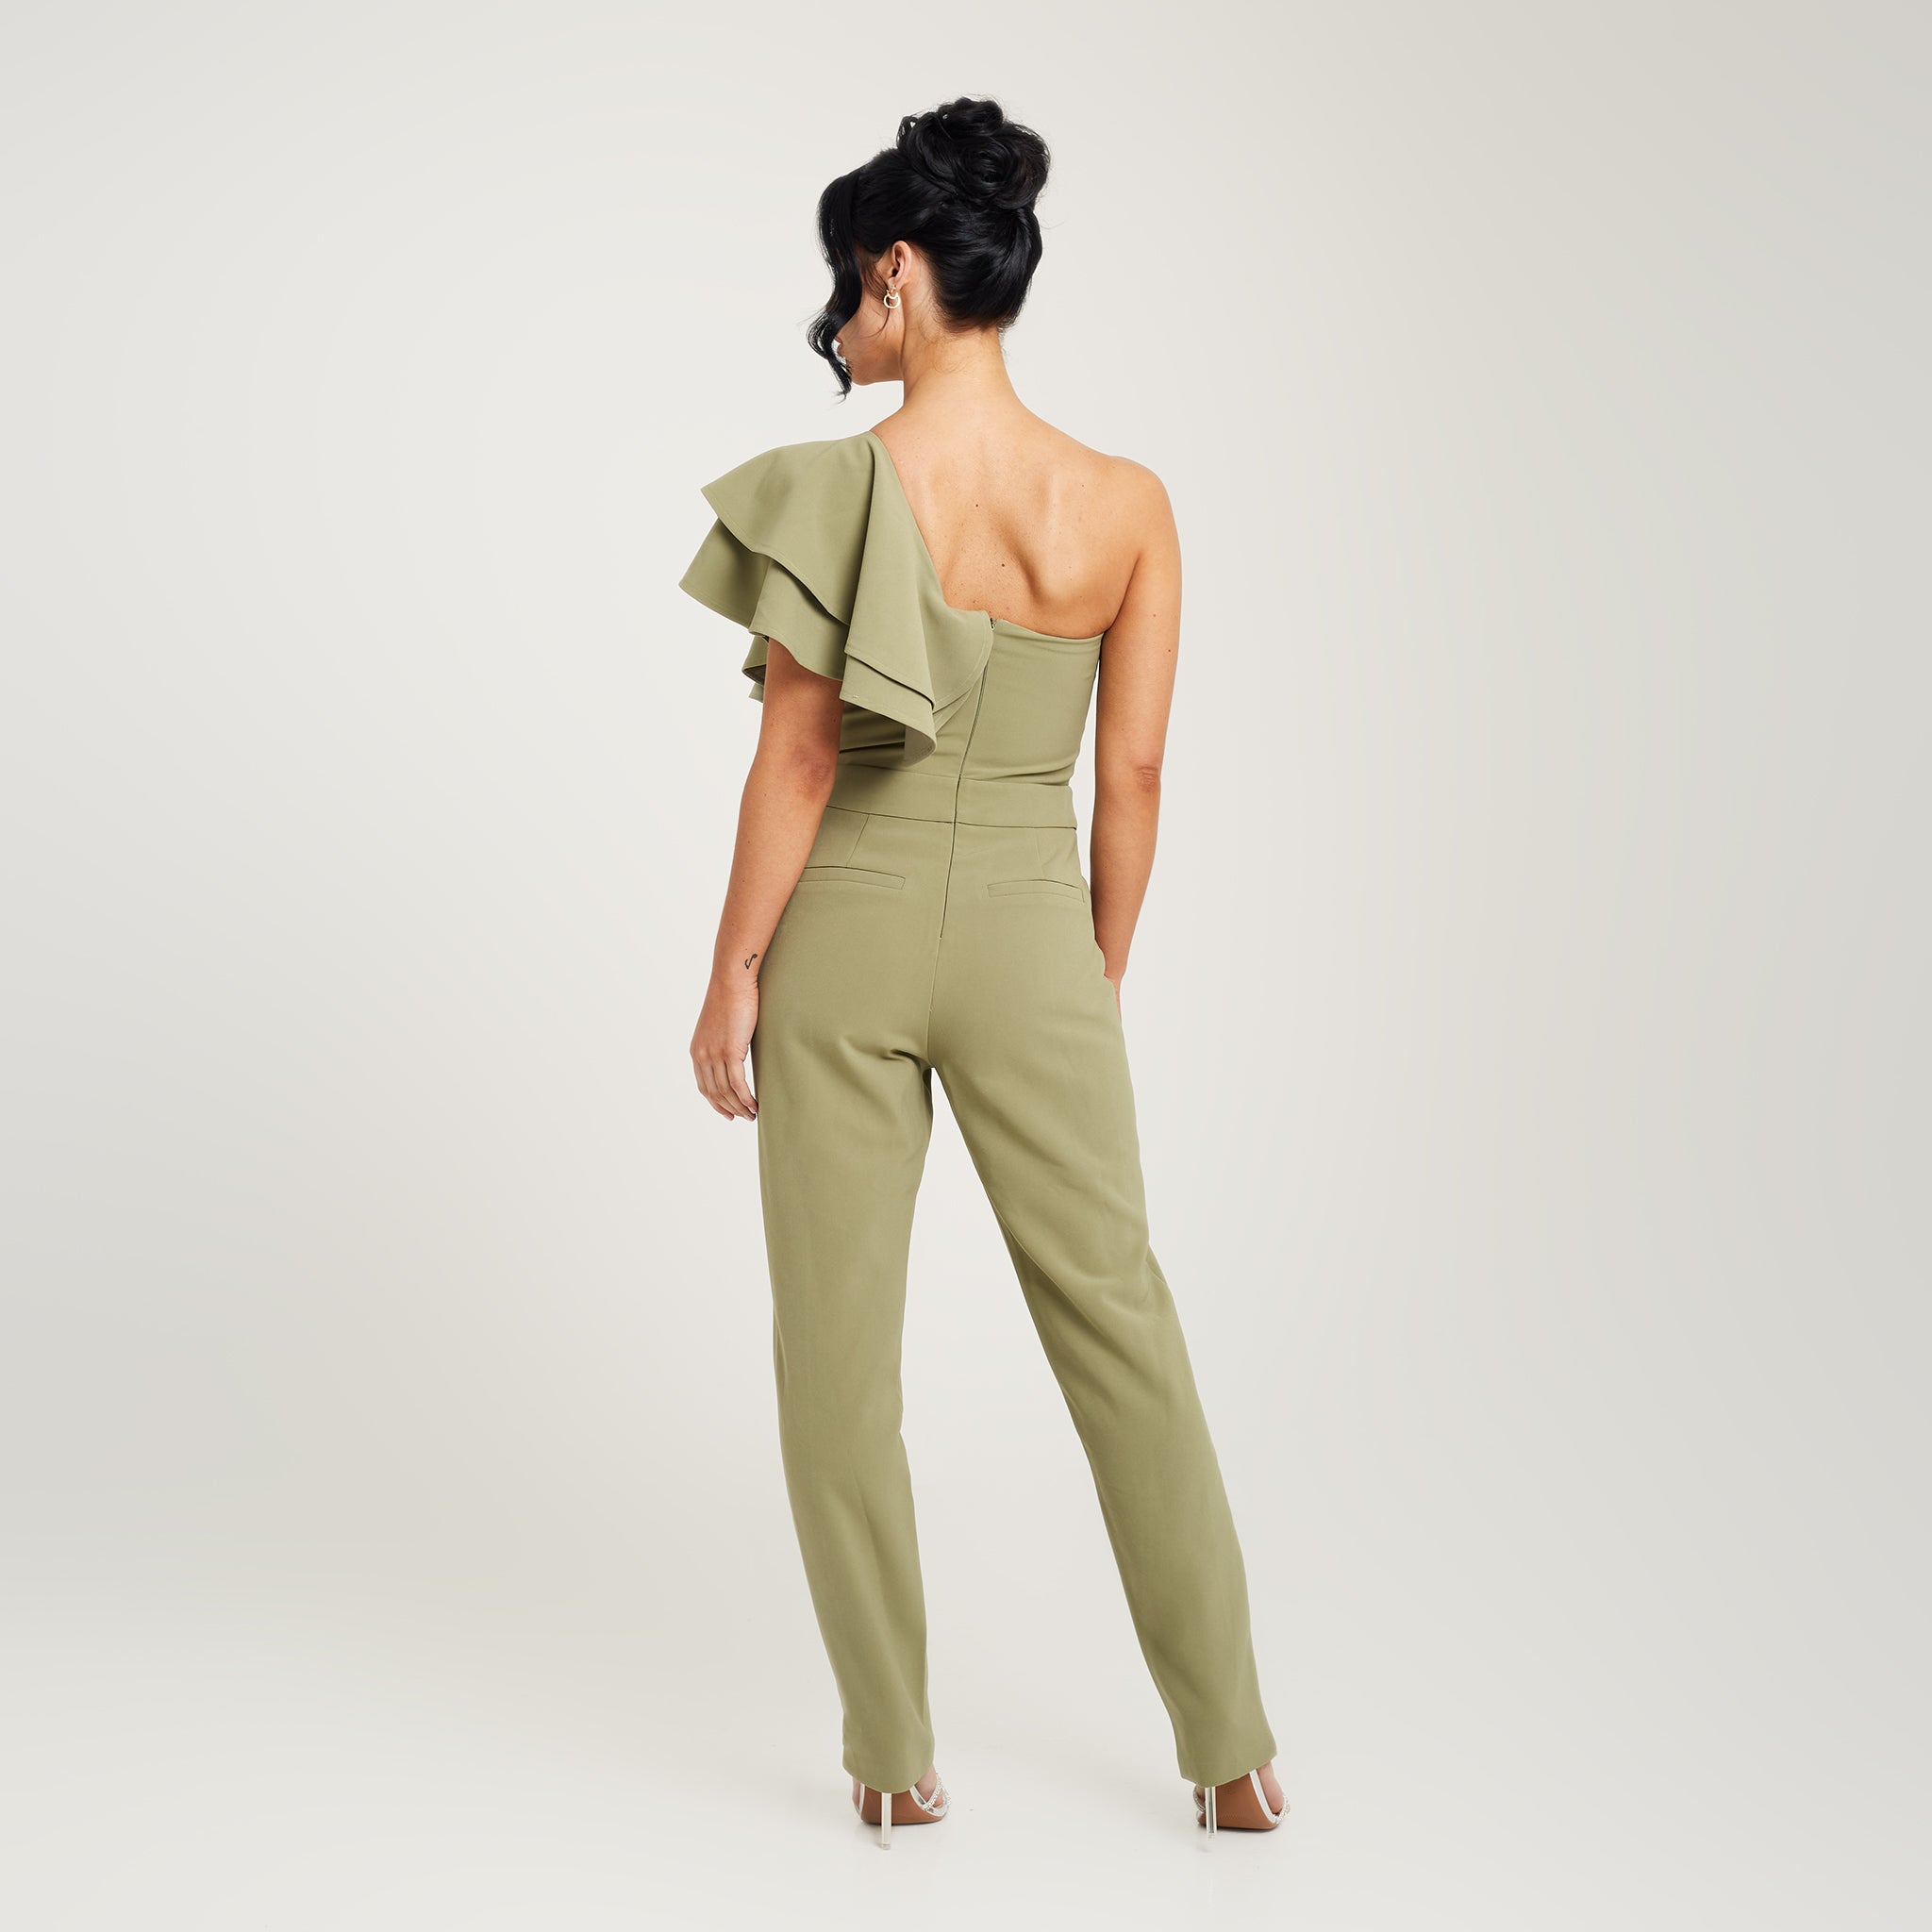 Cally Jane Beech, a woman with shoulder-length brunette hair, showcases a stylish sage green one-shoulder ruffle jumpsuit with cigarette trousers. The jumpsuit features a single shoulder strap, creating an asymmetrical neckline, while the ruffle detail cascades elegantly down the bodice, adding a feminine and playful touch. The jumpsuit's sleek cigarette trousers fit snugly and taper down to the ankles, creating a streamlined and polished look.